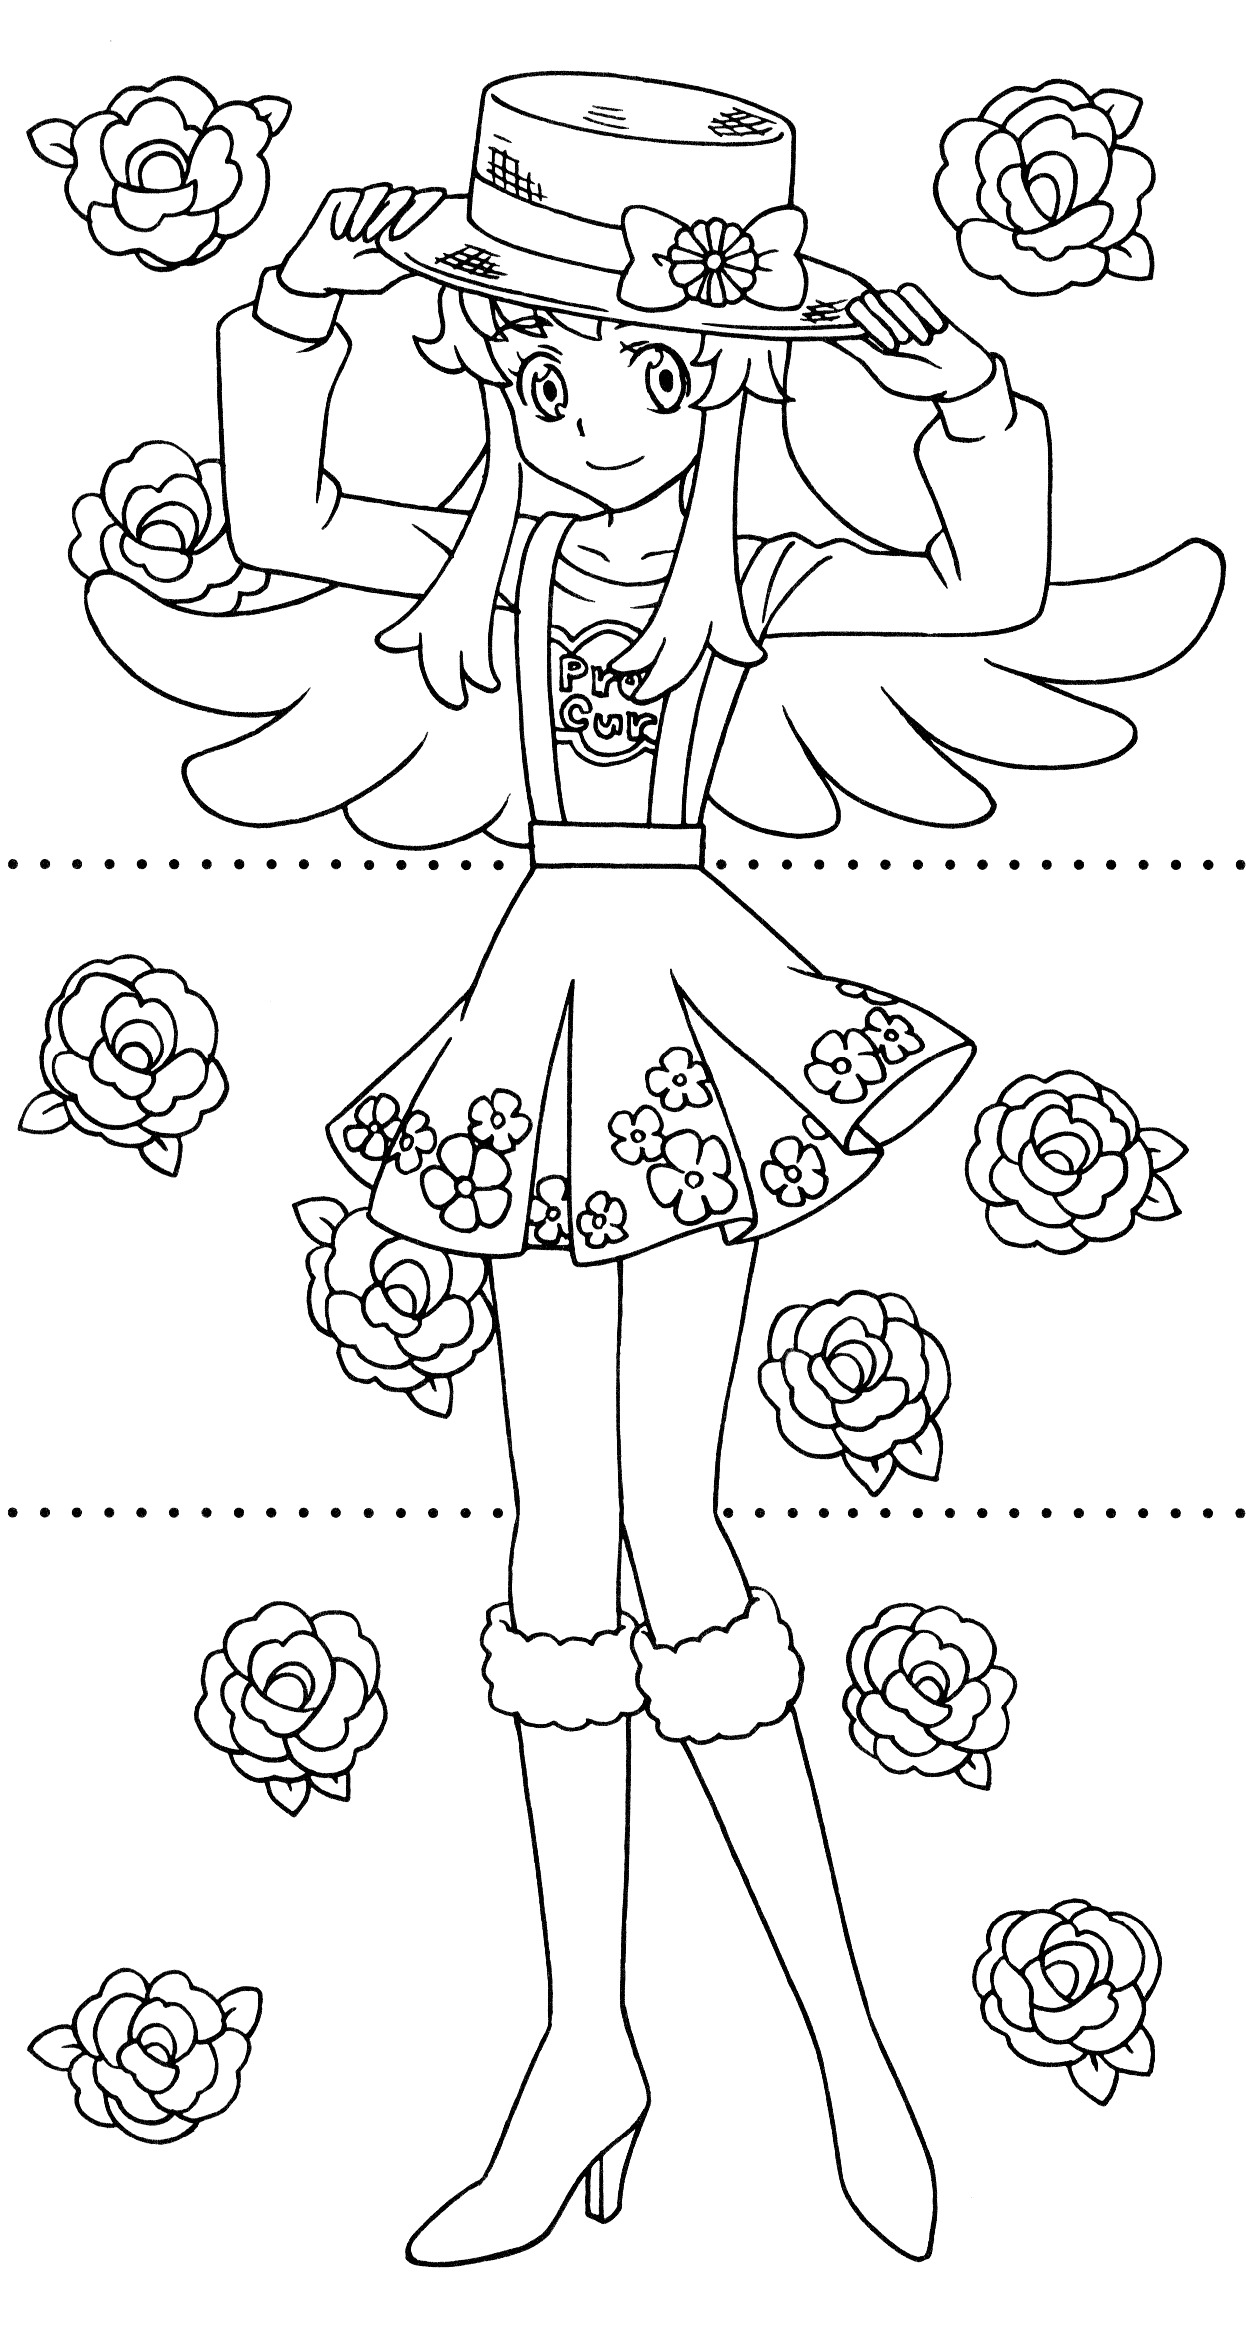 Happiness Charge Precure Dressup Coloring Book 21